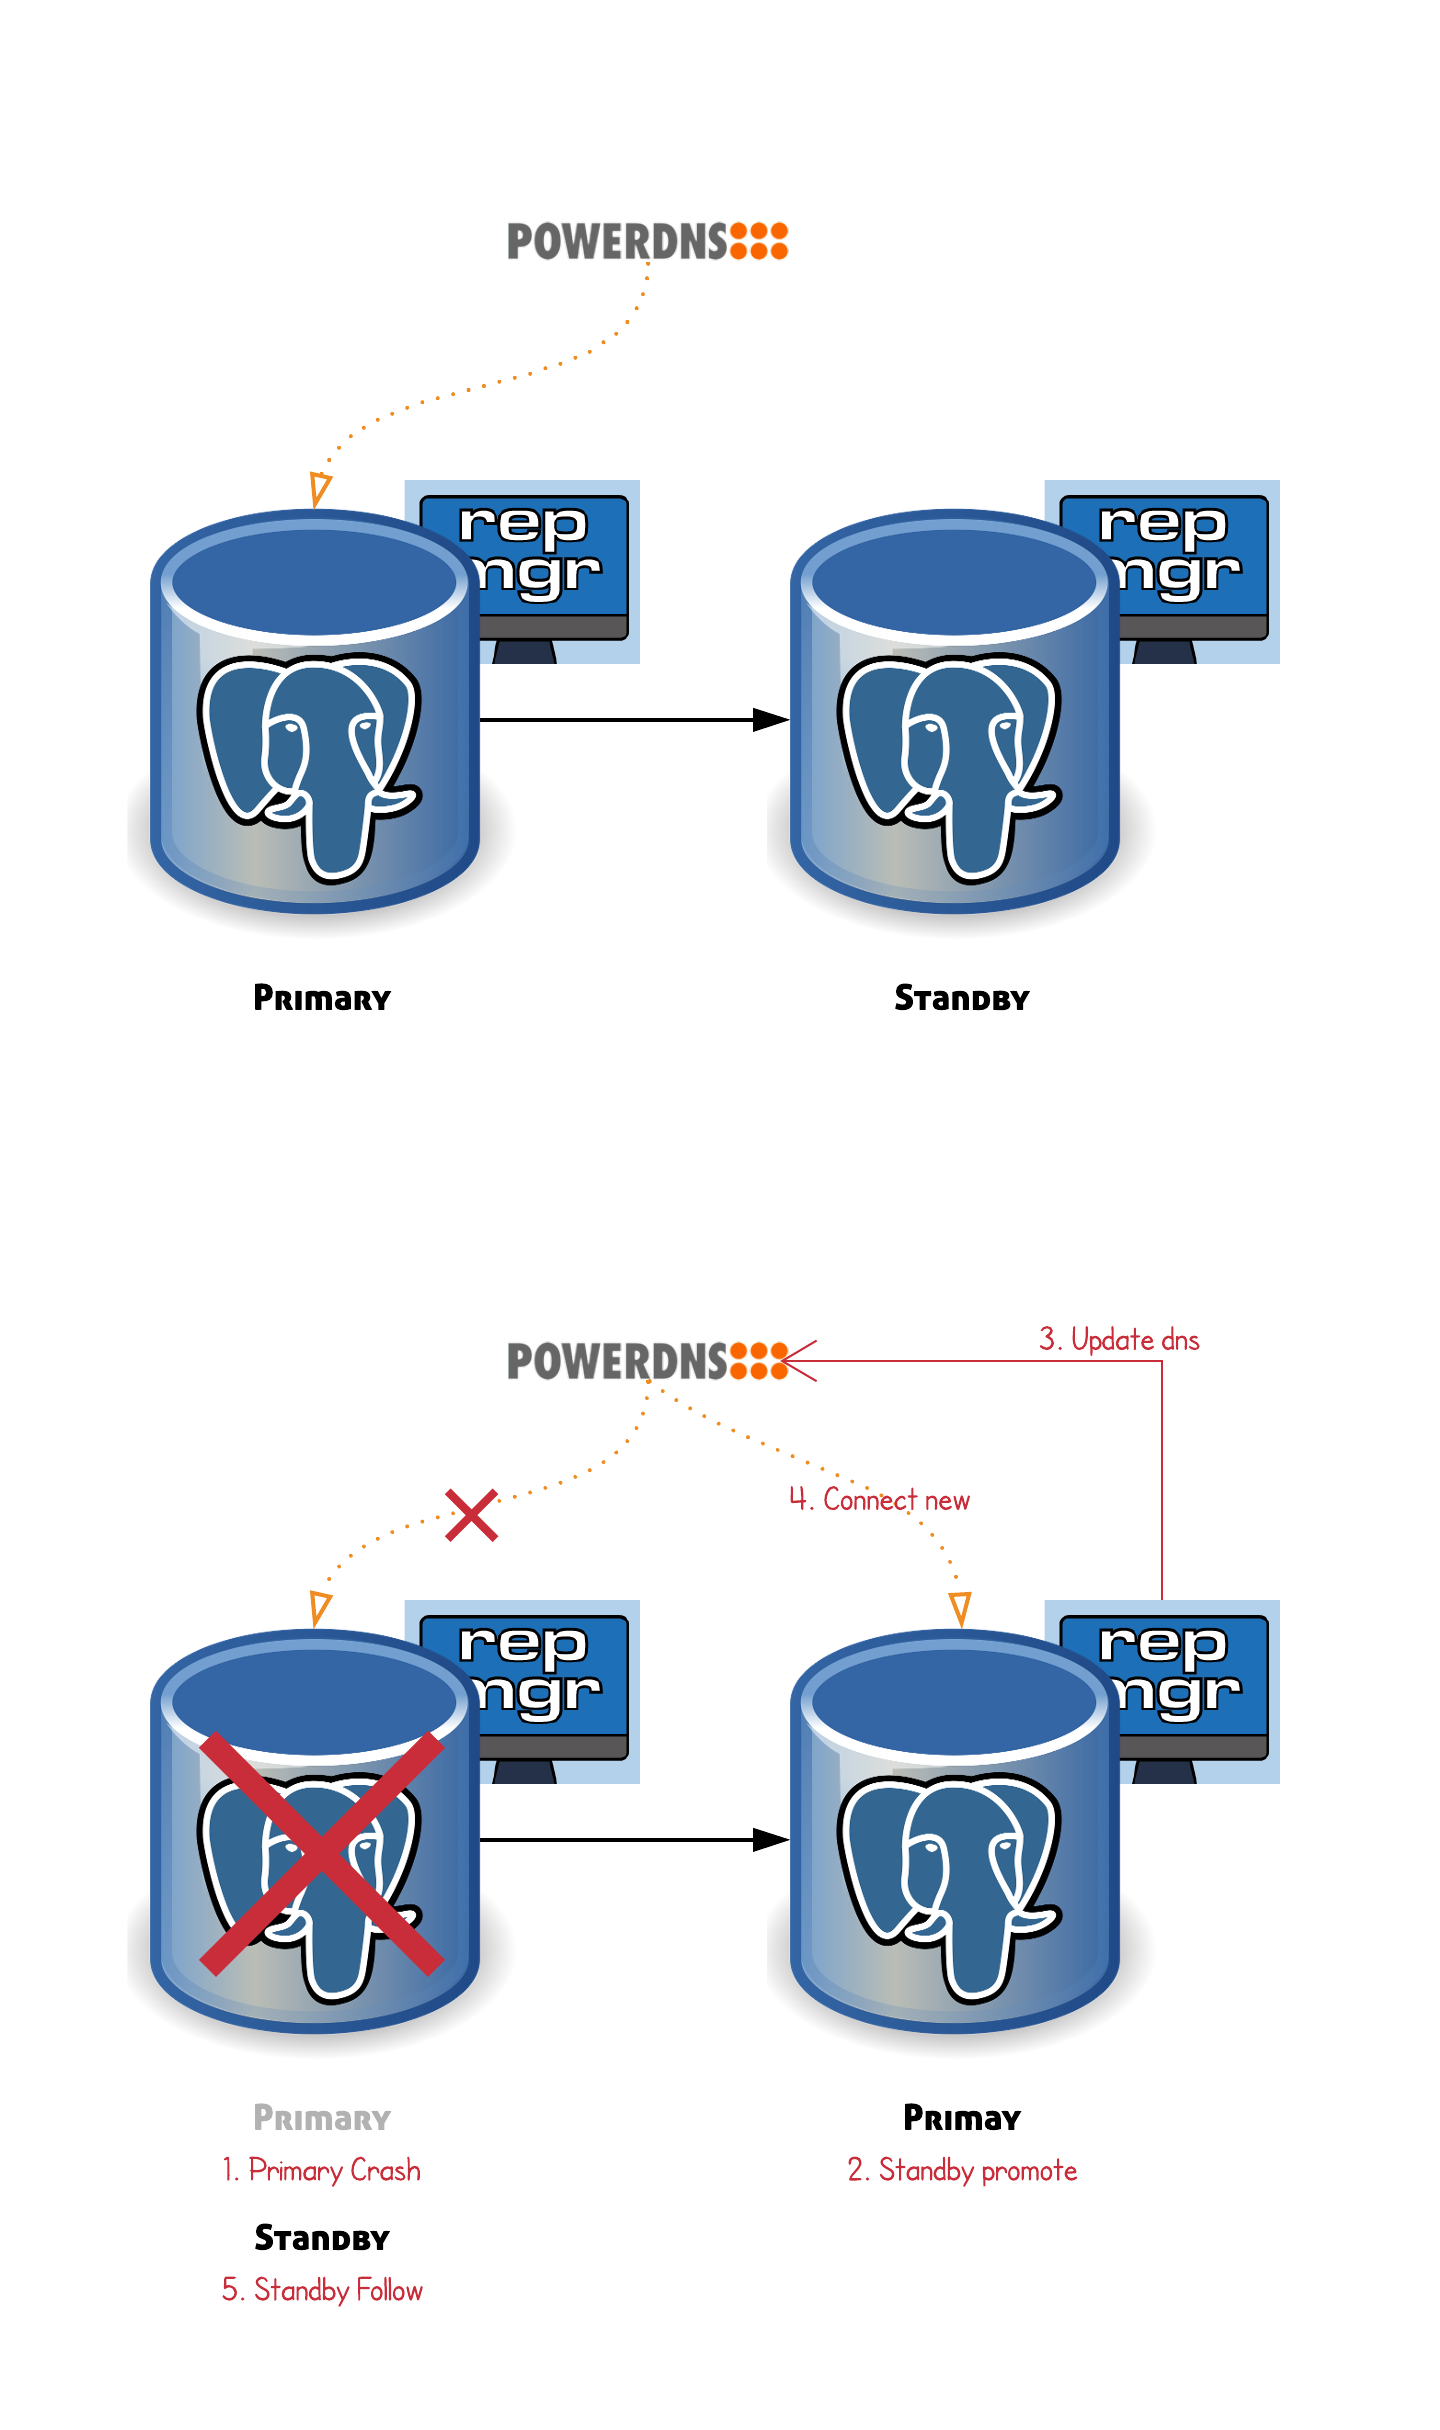 repmgr_and_powerdns